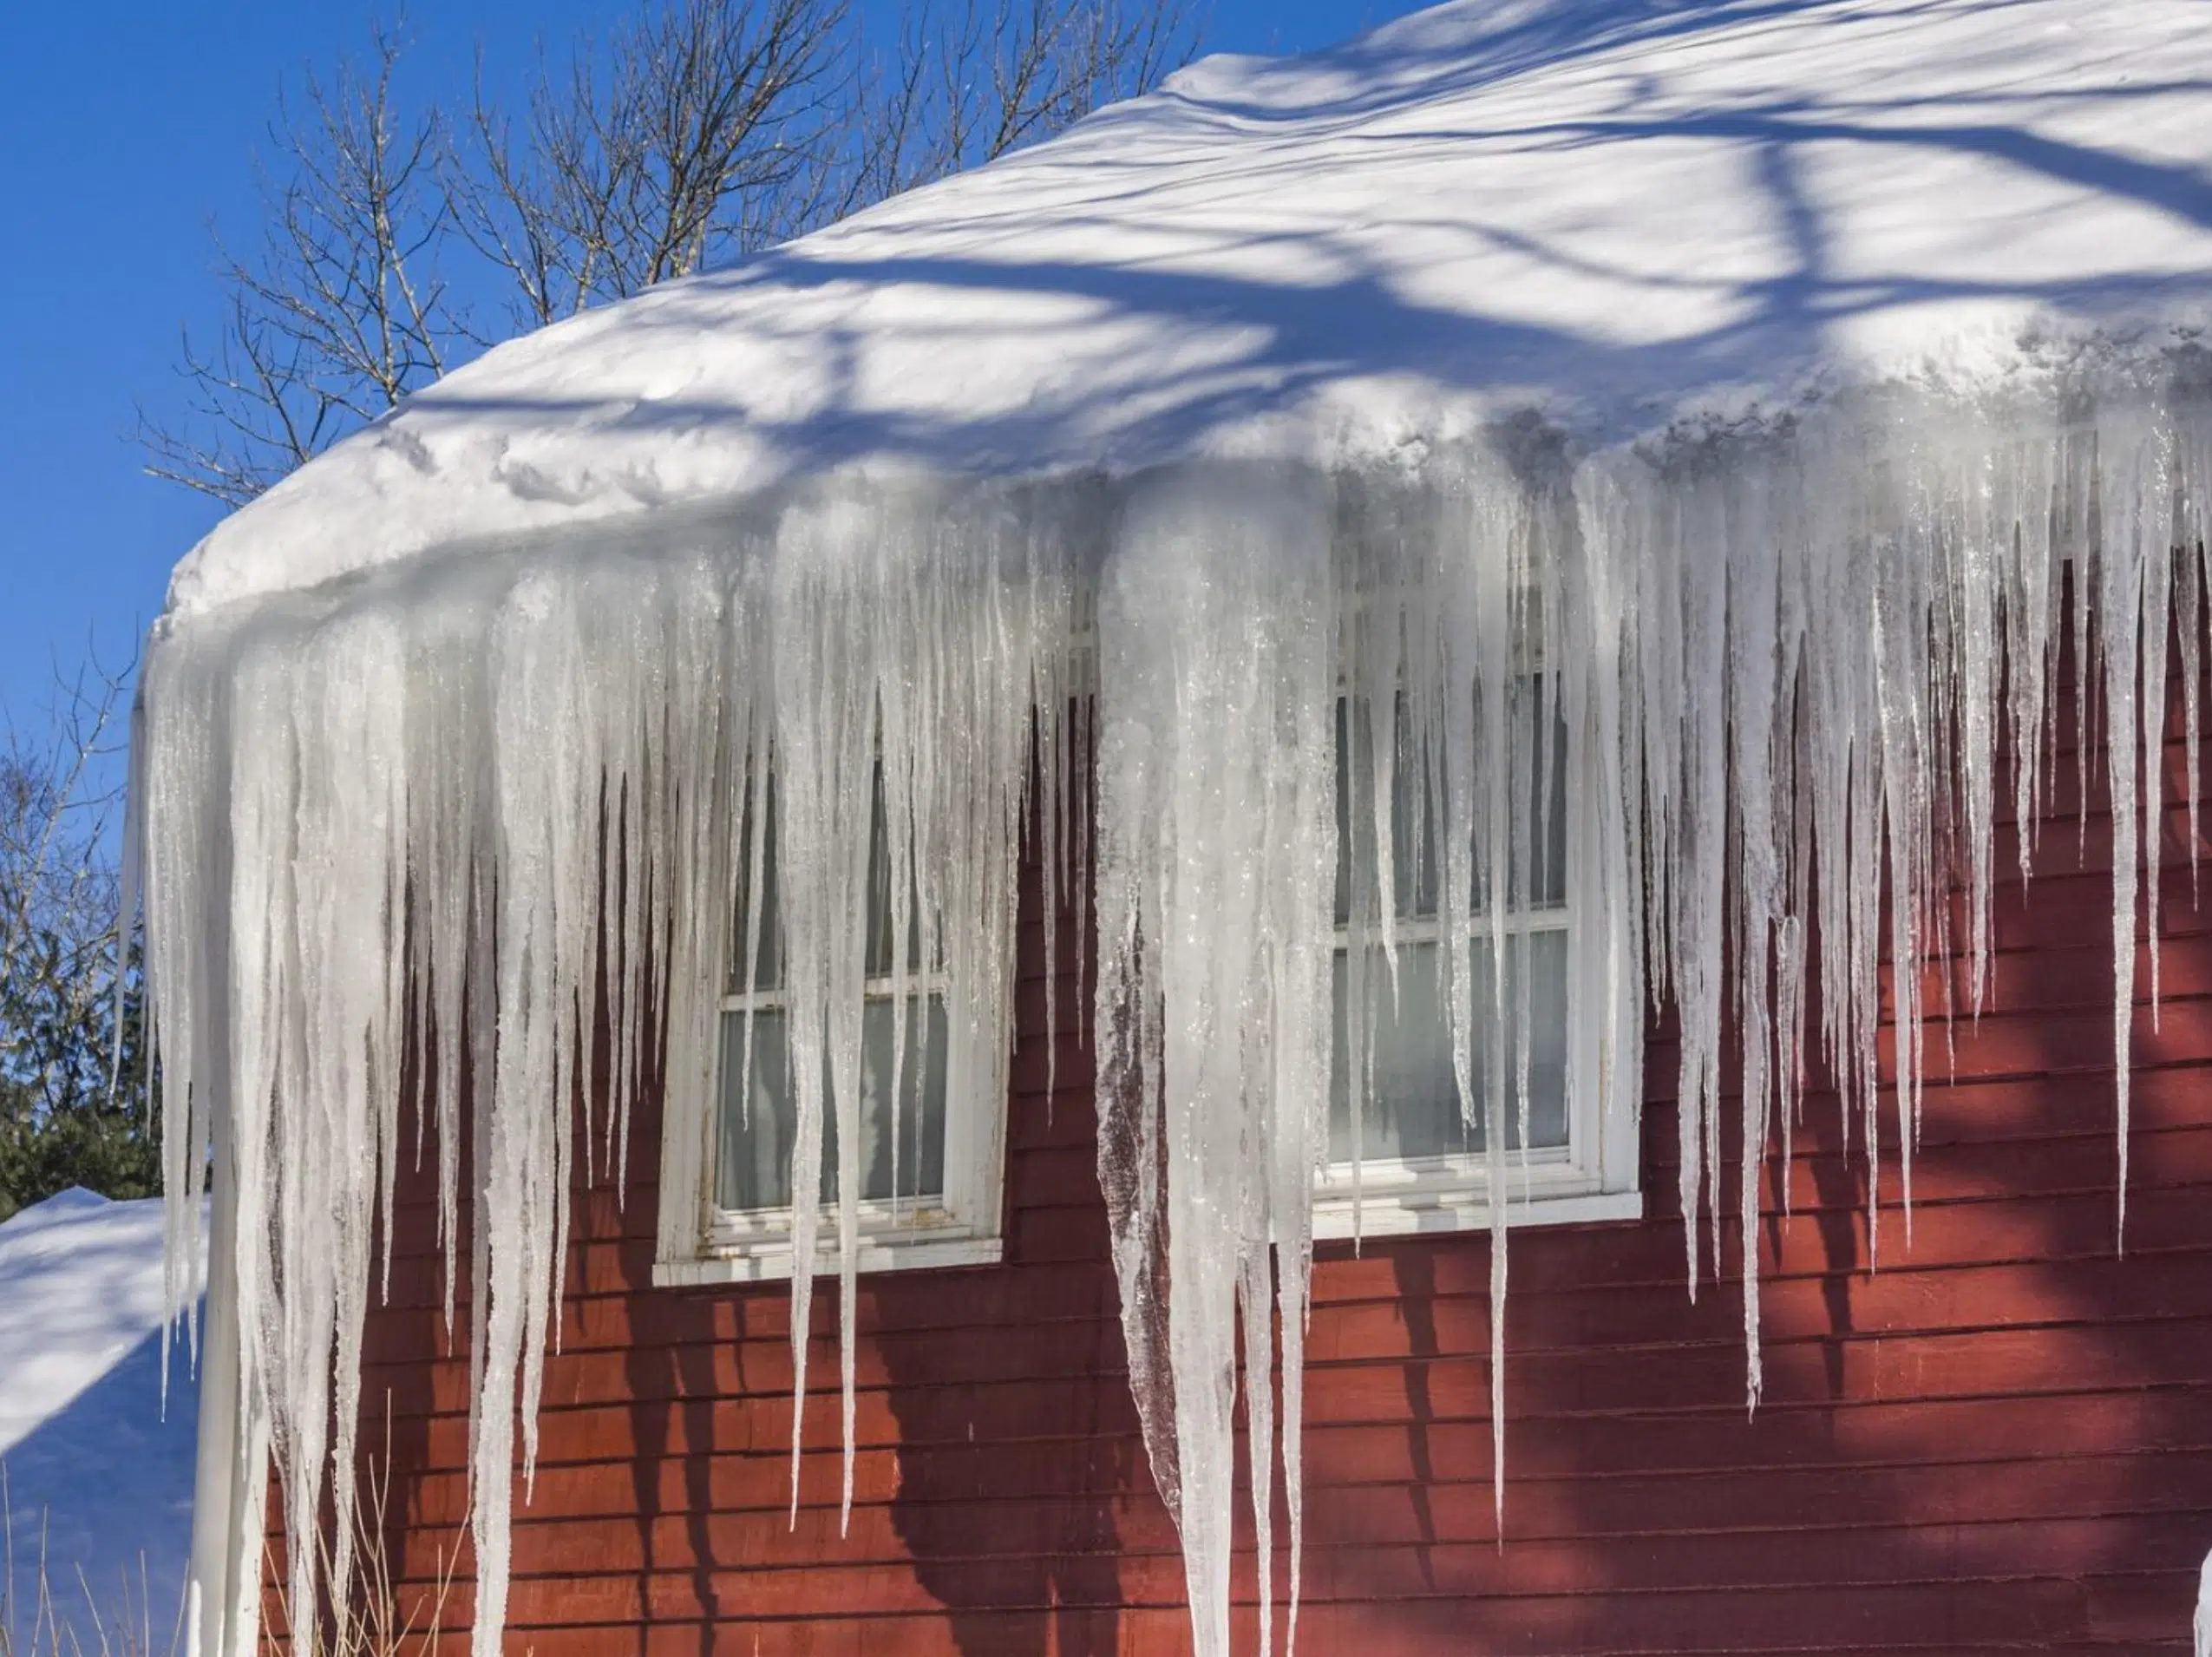 House with ice on its roof in the winter season